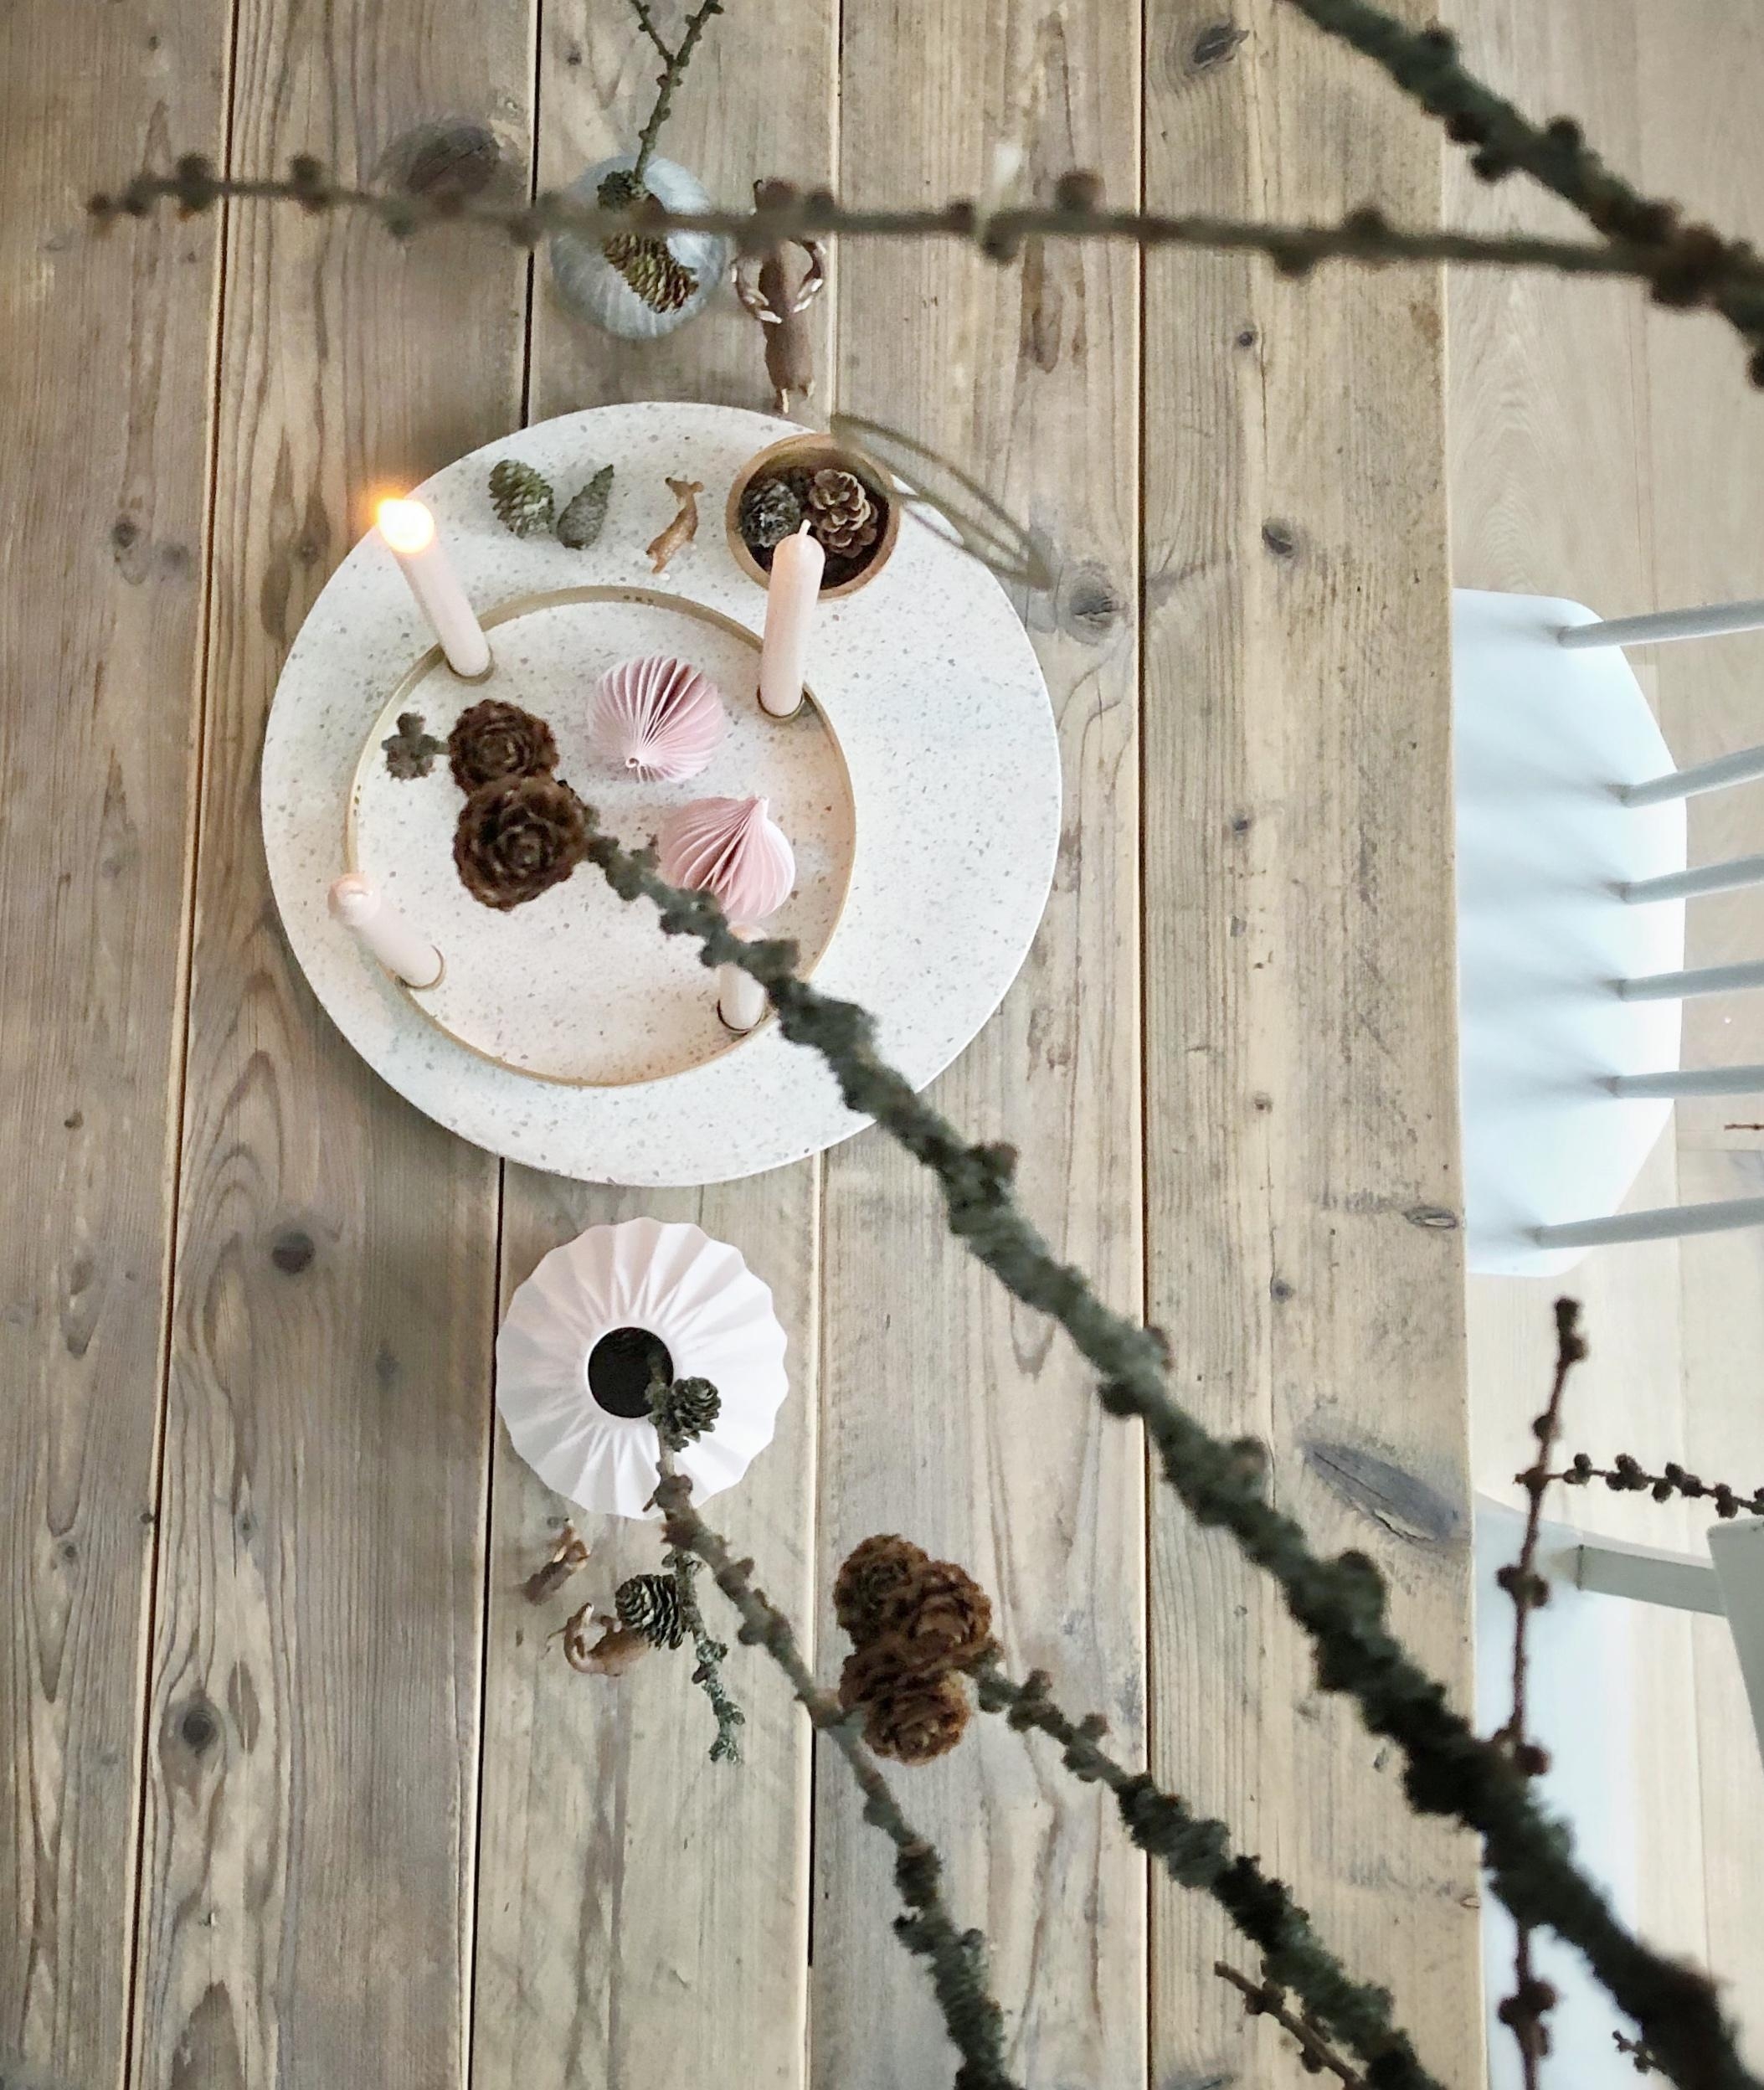 Erster Advent!
#ersteradvent#advent#weihnachtszeit#christmas#whitehome#whiteandwood#natural#pure#nordic